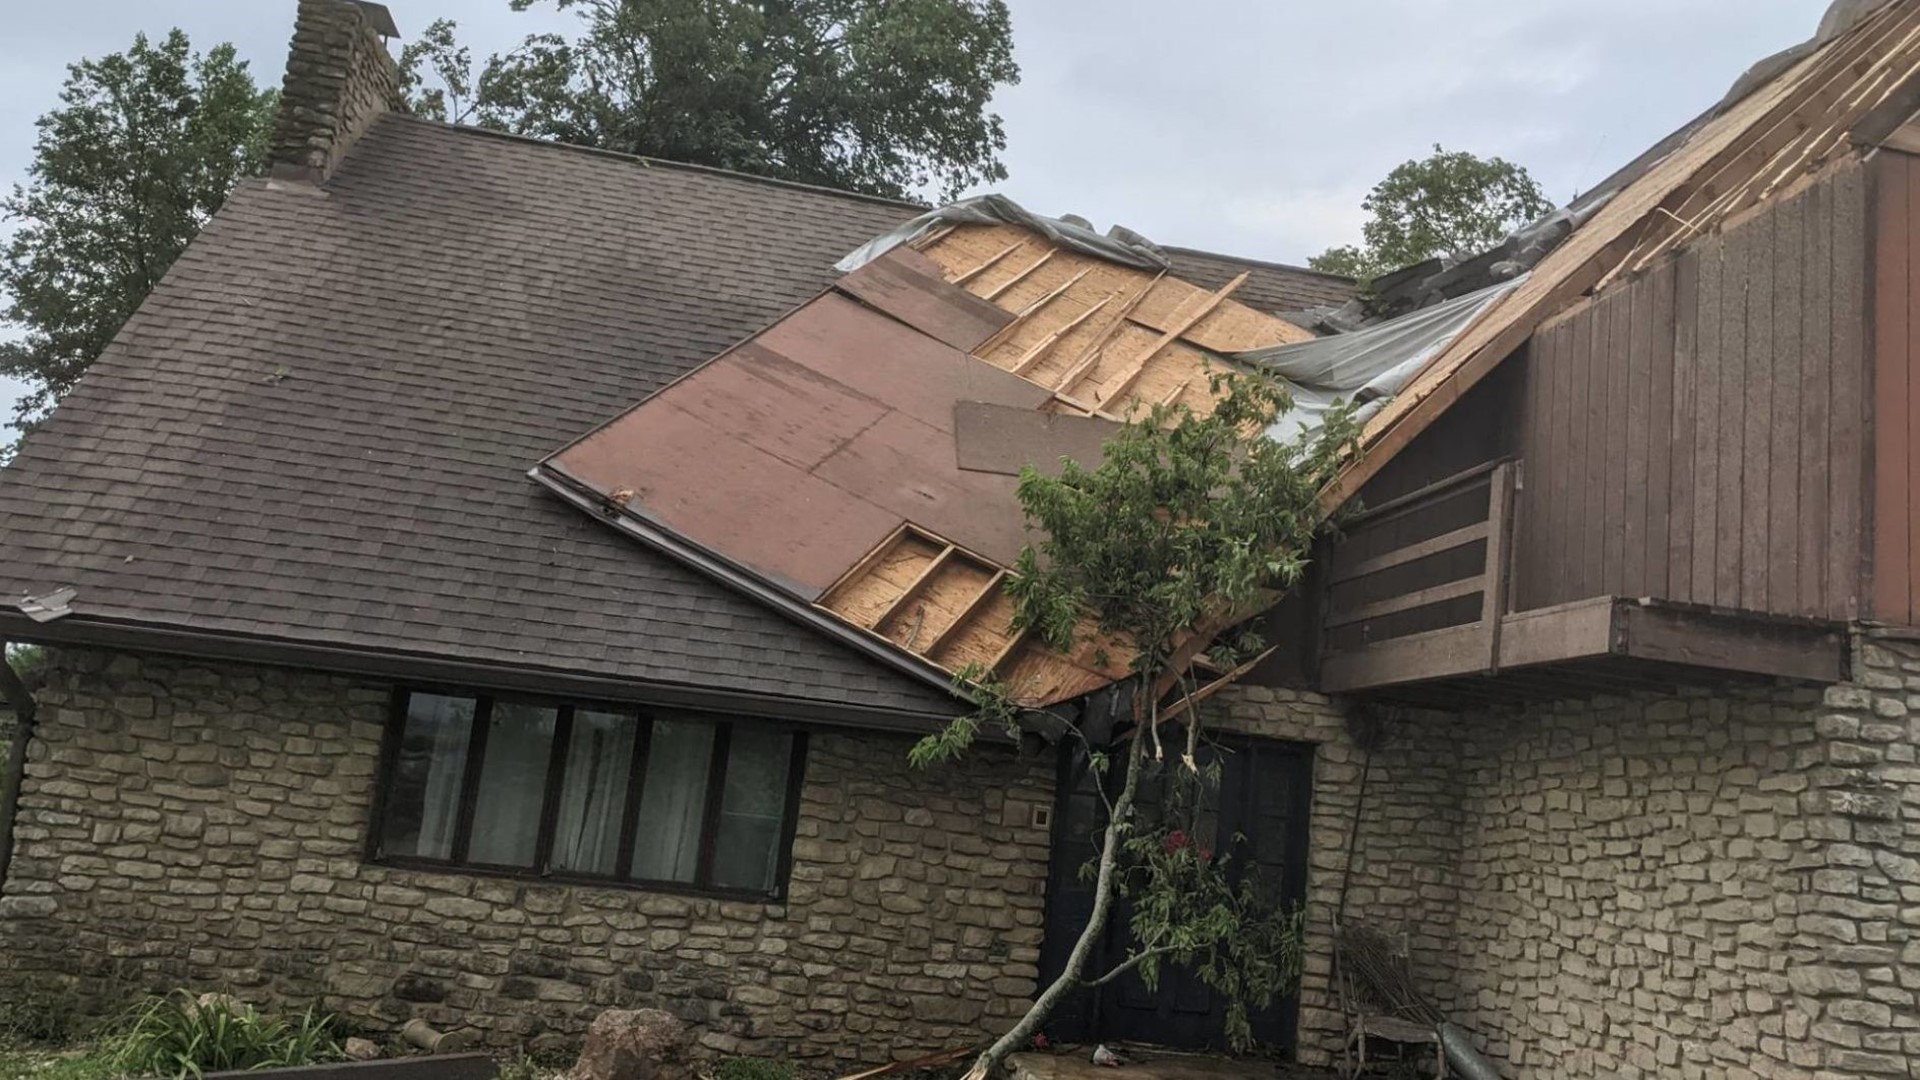 Severe storms brought wind damage and possible tornado damage.